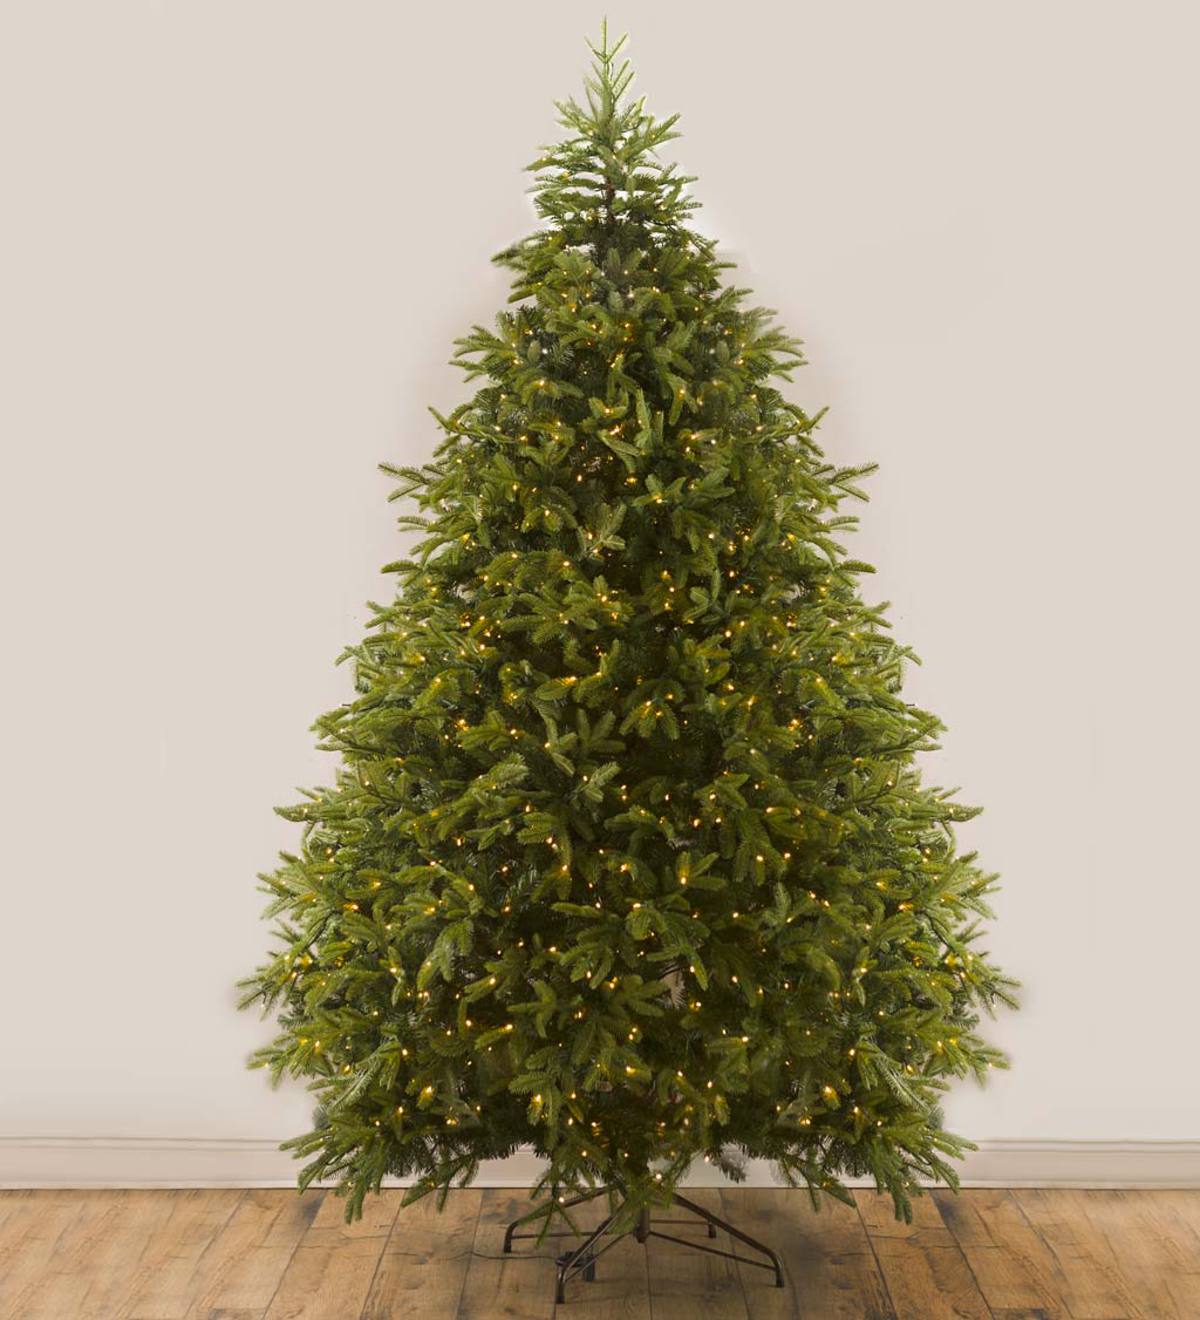 6'6" Mountain Spruce Christmas Trees with 780 Lights